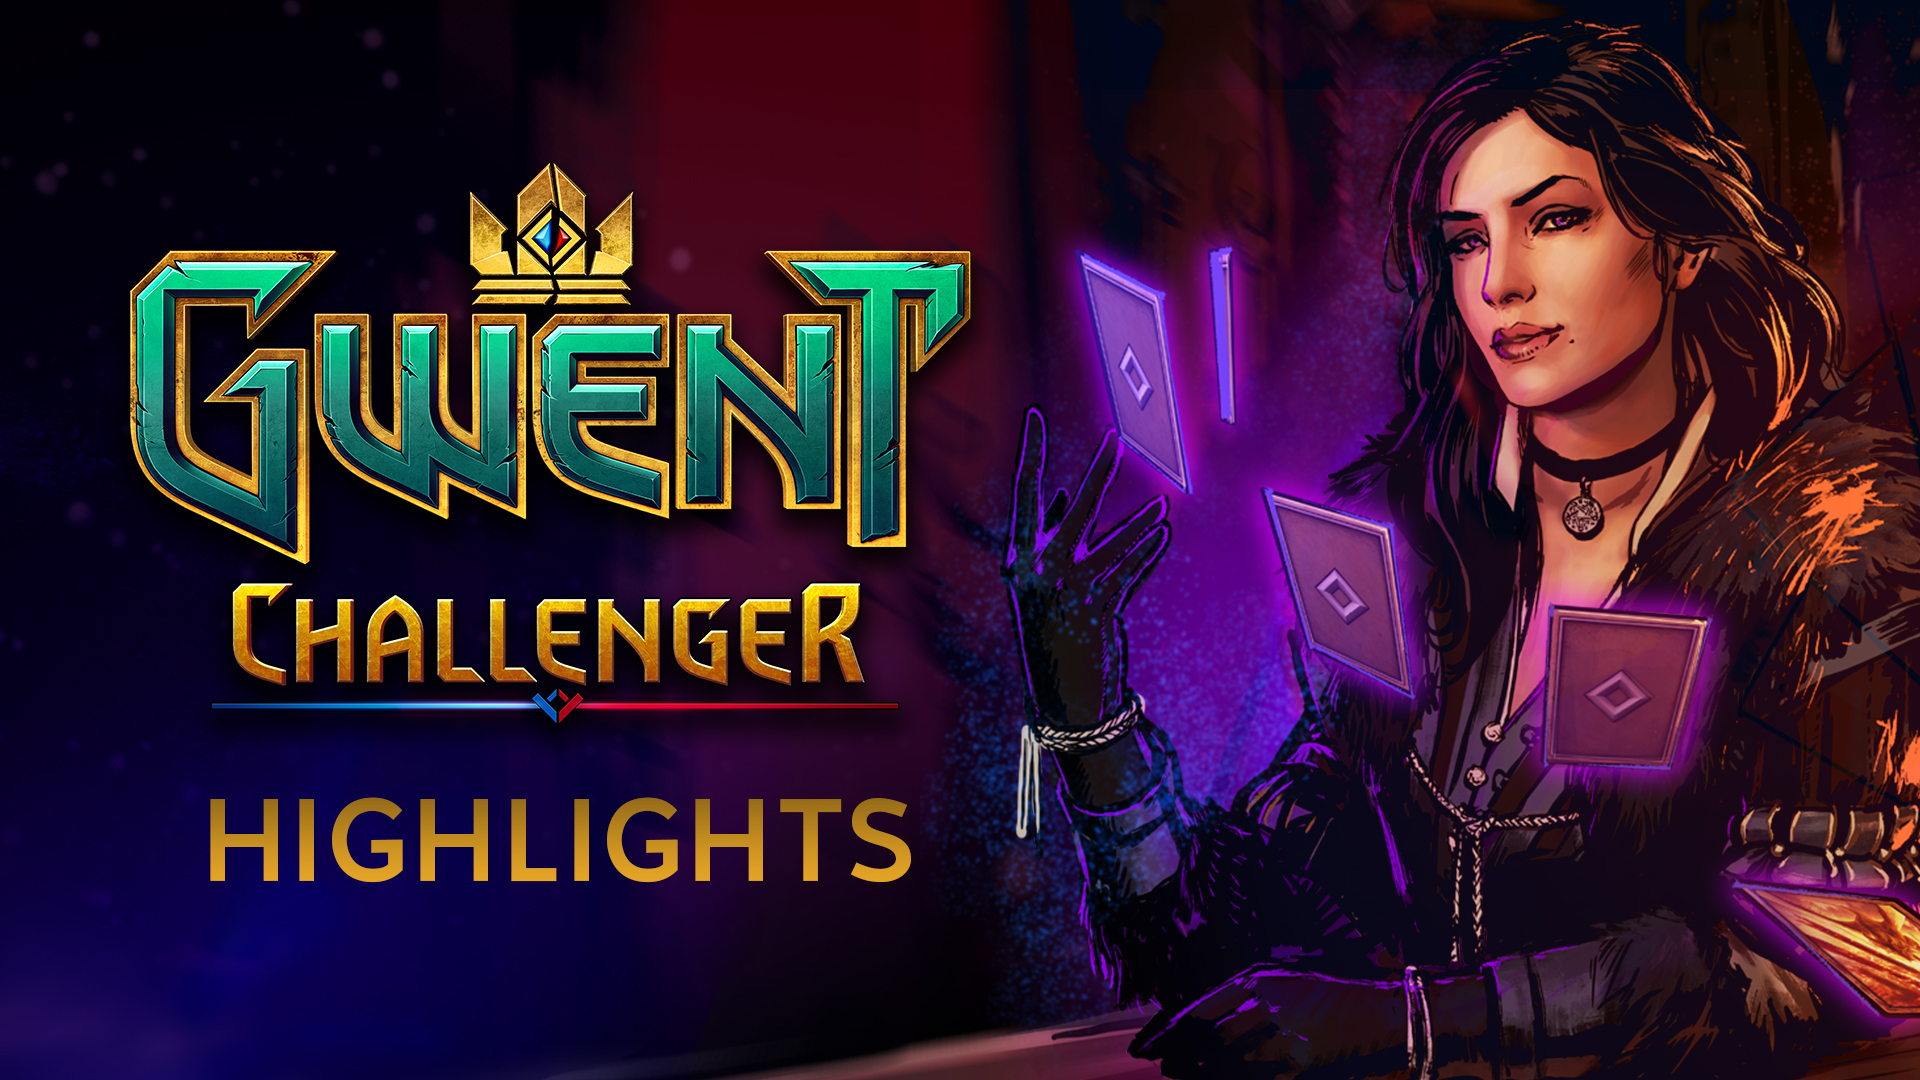 GWENT Challenger tournament has crowned a Champion - GWENT: The Witcher Card